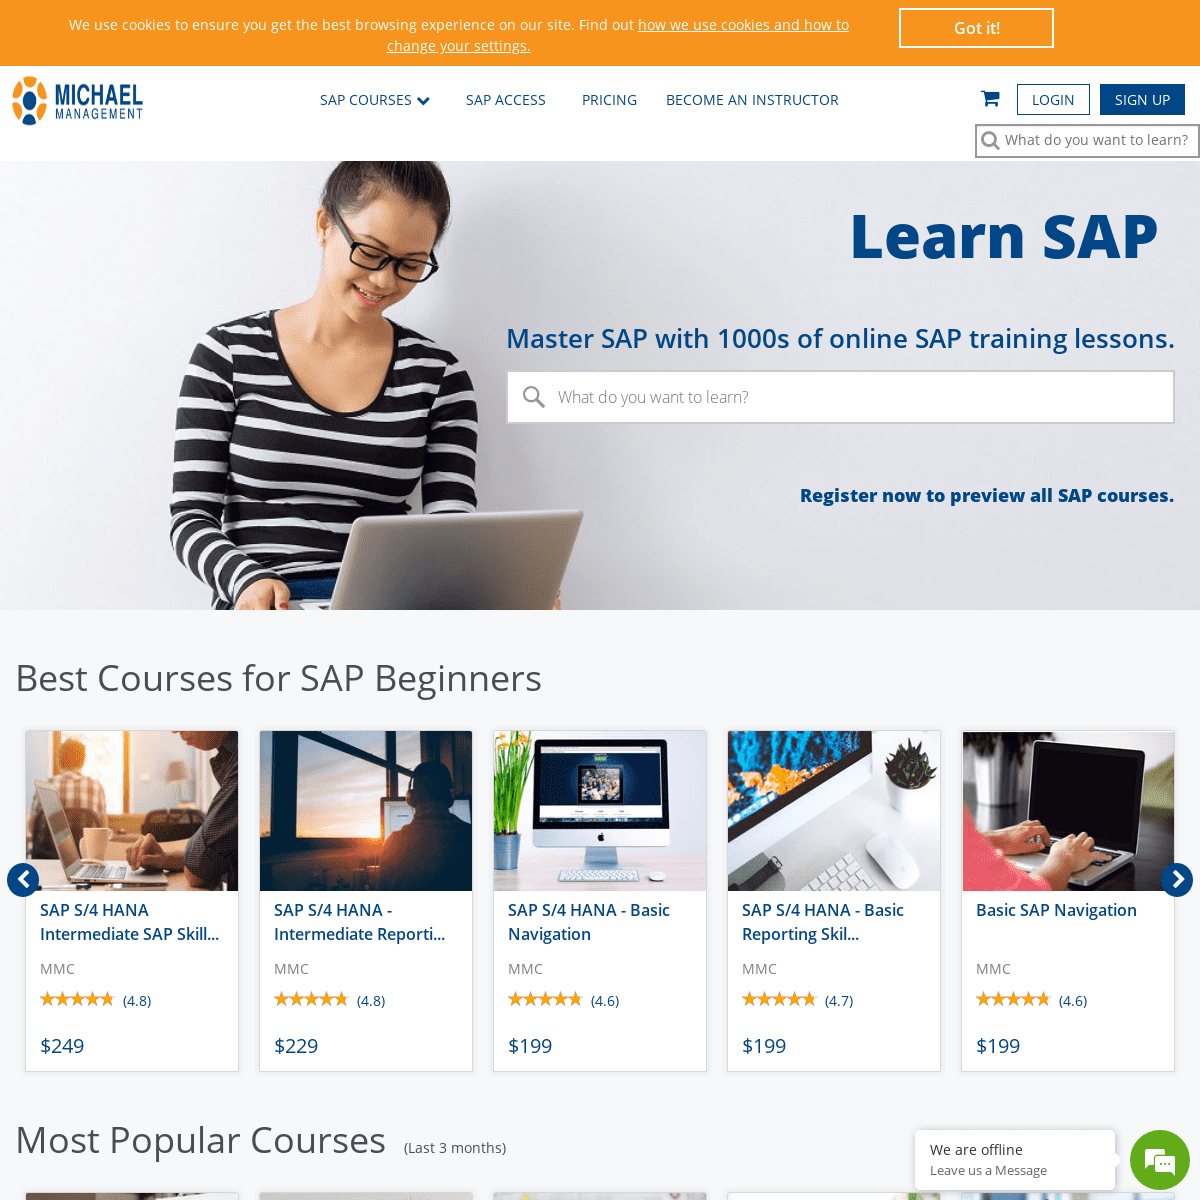 SAP training and SAP courses by Michael Management